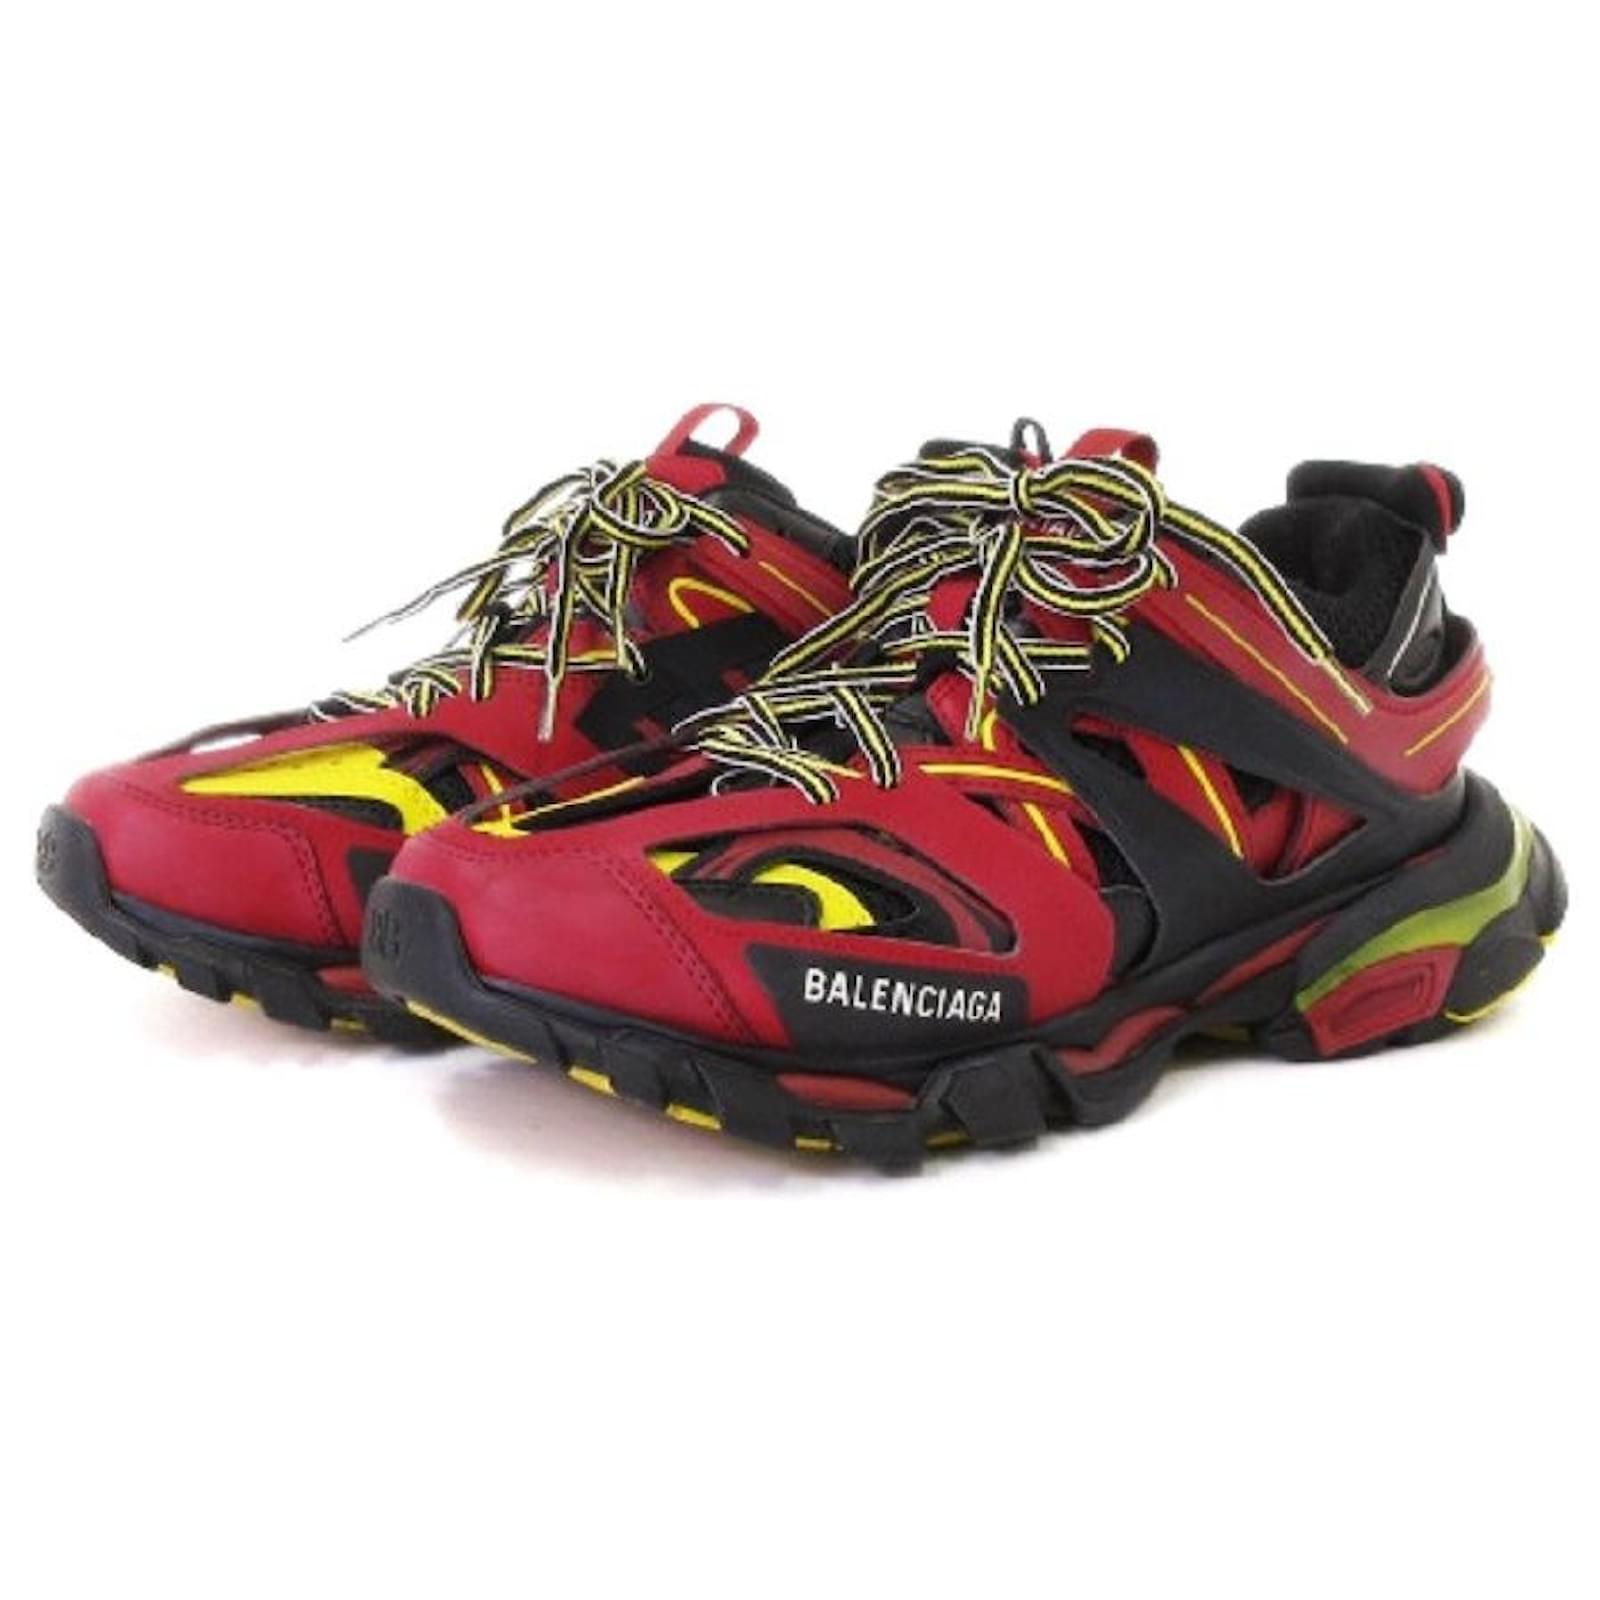 Used] Balenciaga BALENCIAGA TRACK TRAINERS SNEAKER track trainer sneakers  542023 red red 41 27 shoes ☆ AA